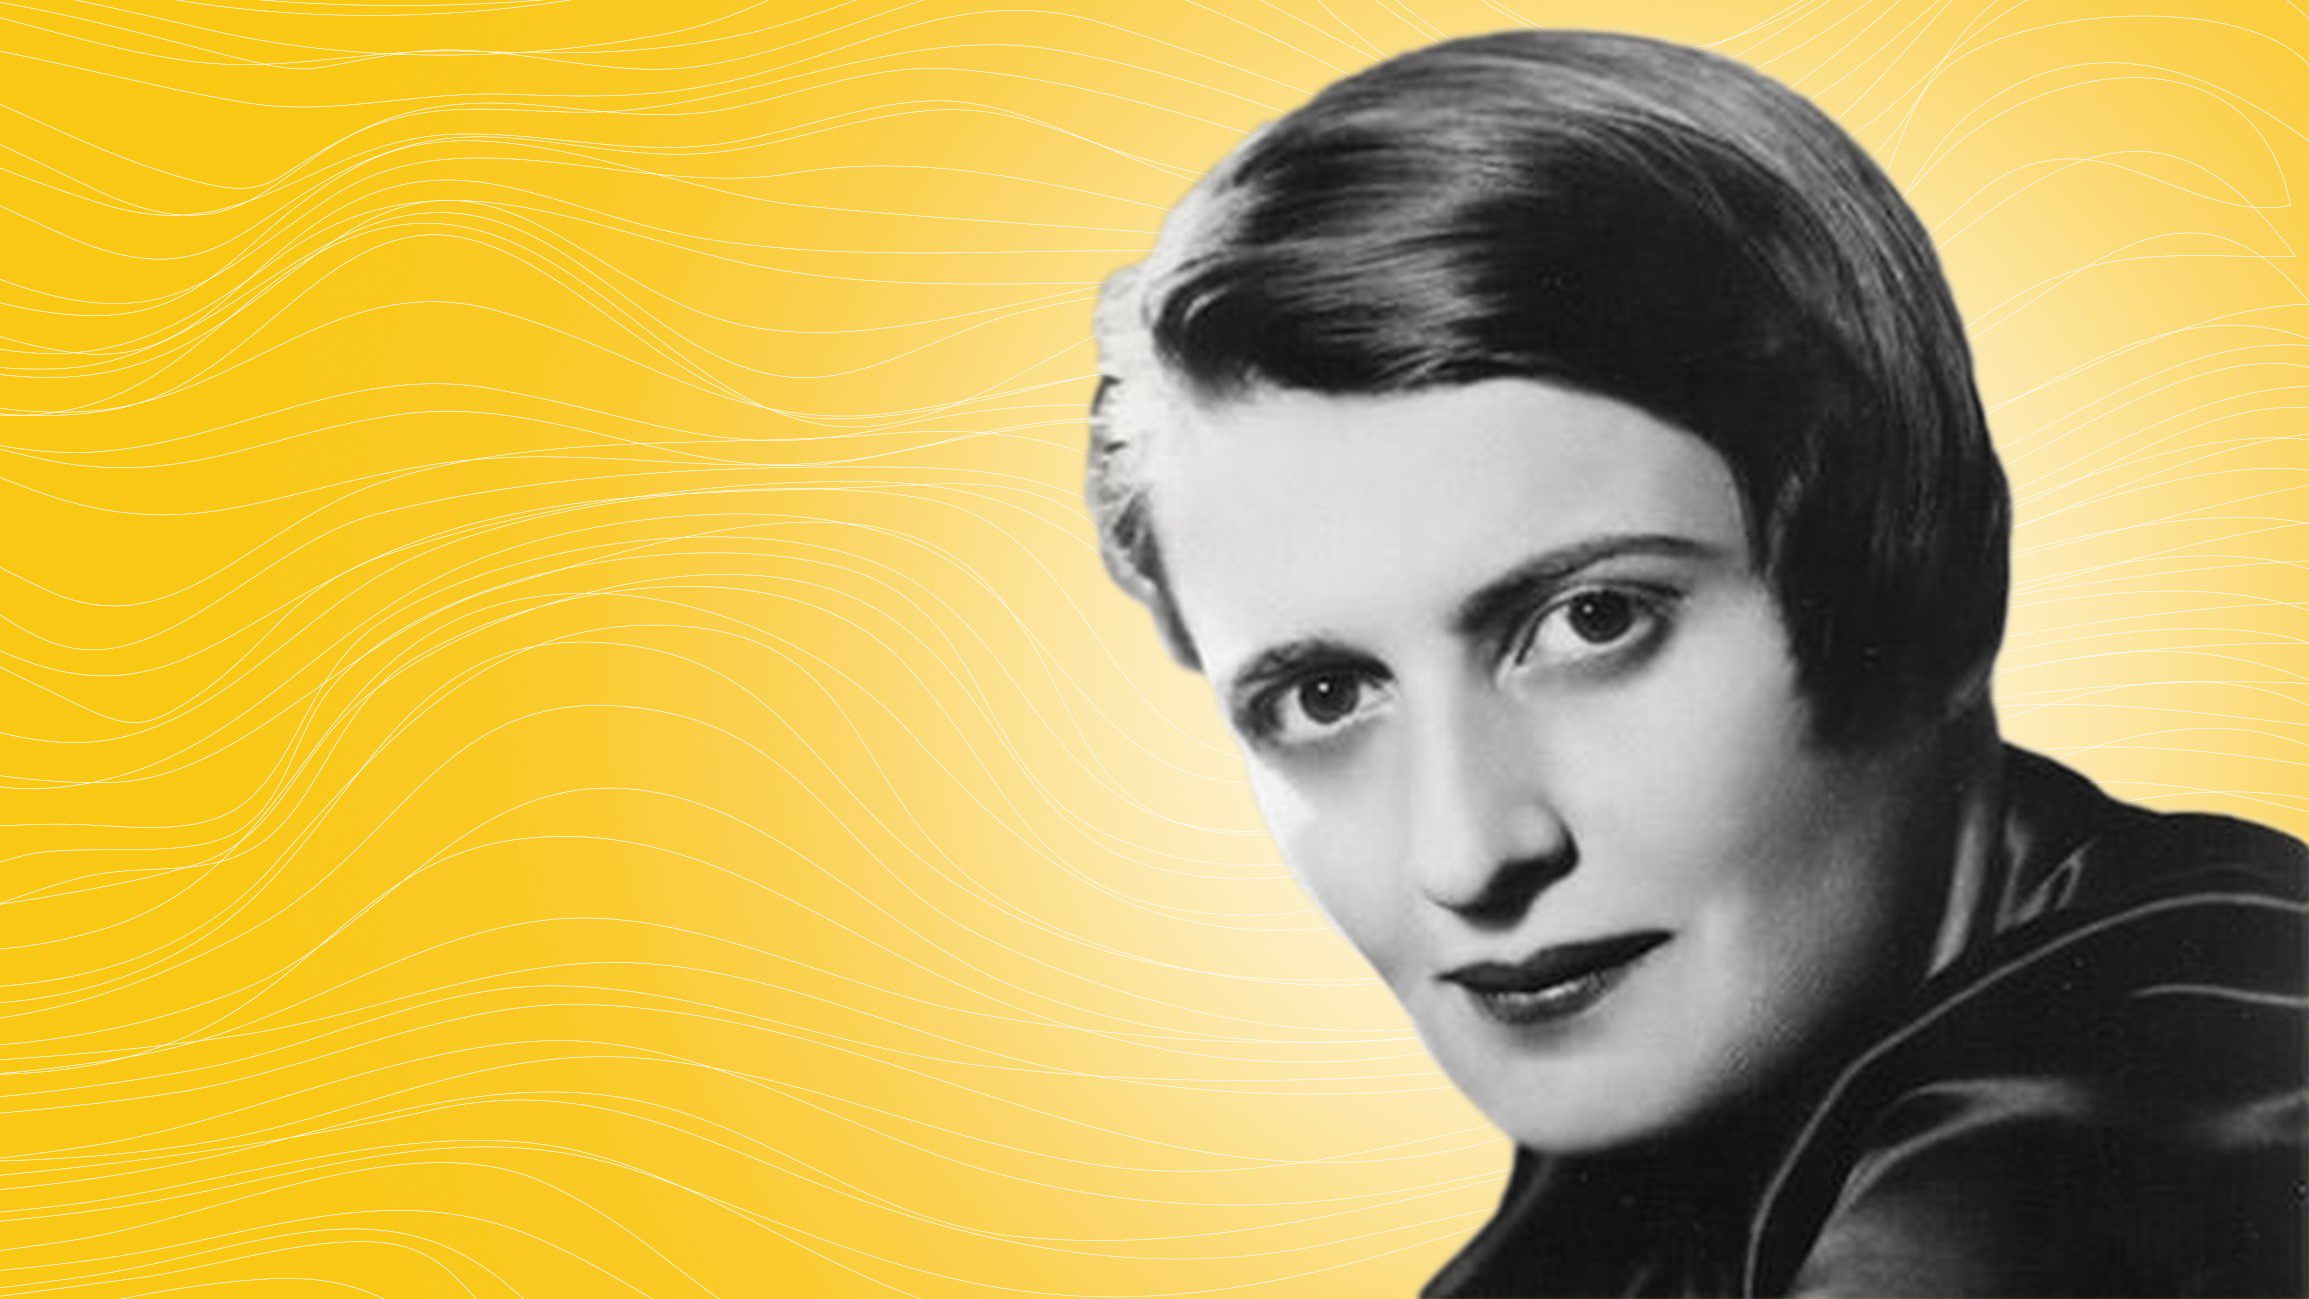 When we think of terms such as capitalism, individualism, or selfishness, one name comes to mind: Ayn Rand. But what makes Rand so significant?